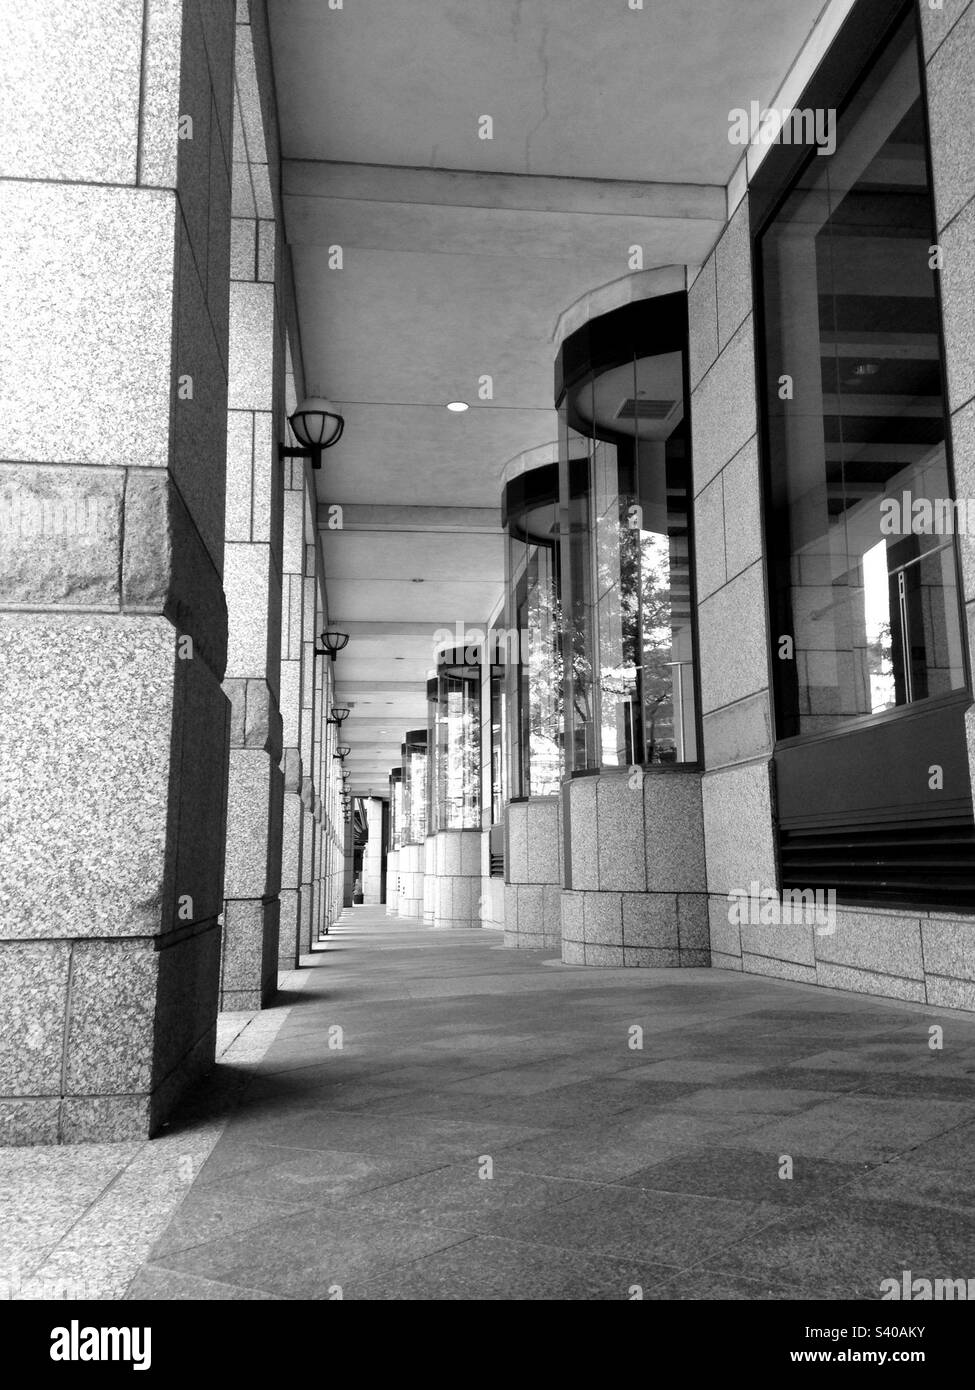 John B. Hynes Veterans Memorial Convention Center in Boston, Massachusetts, USA. Exterior view of first floor outside in Back Bay area. Black and white photo. Stock Photo